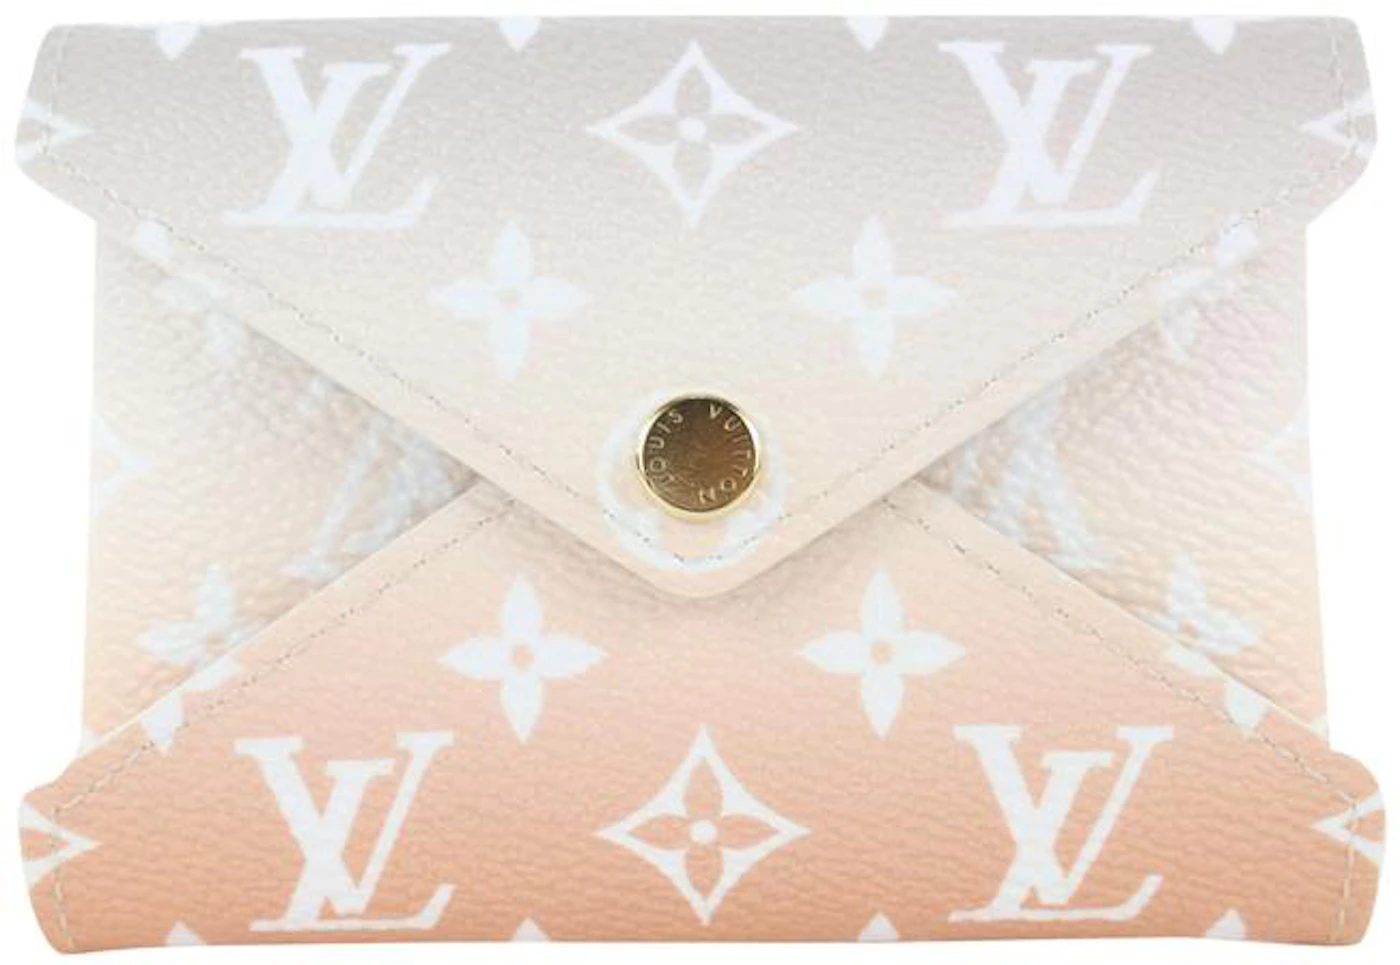 Louis Vuitton Kirigami Pouch Bag Charm and Key Holder Mist in